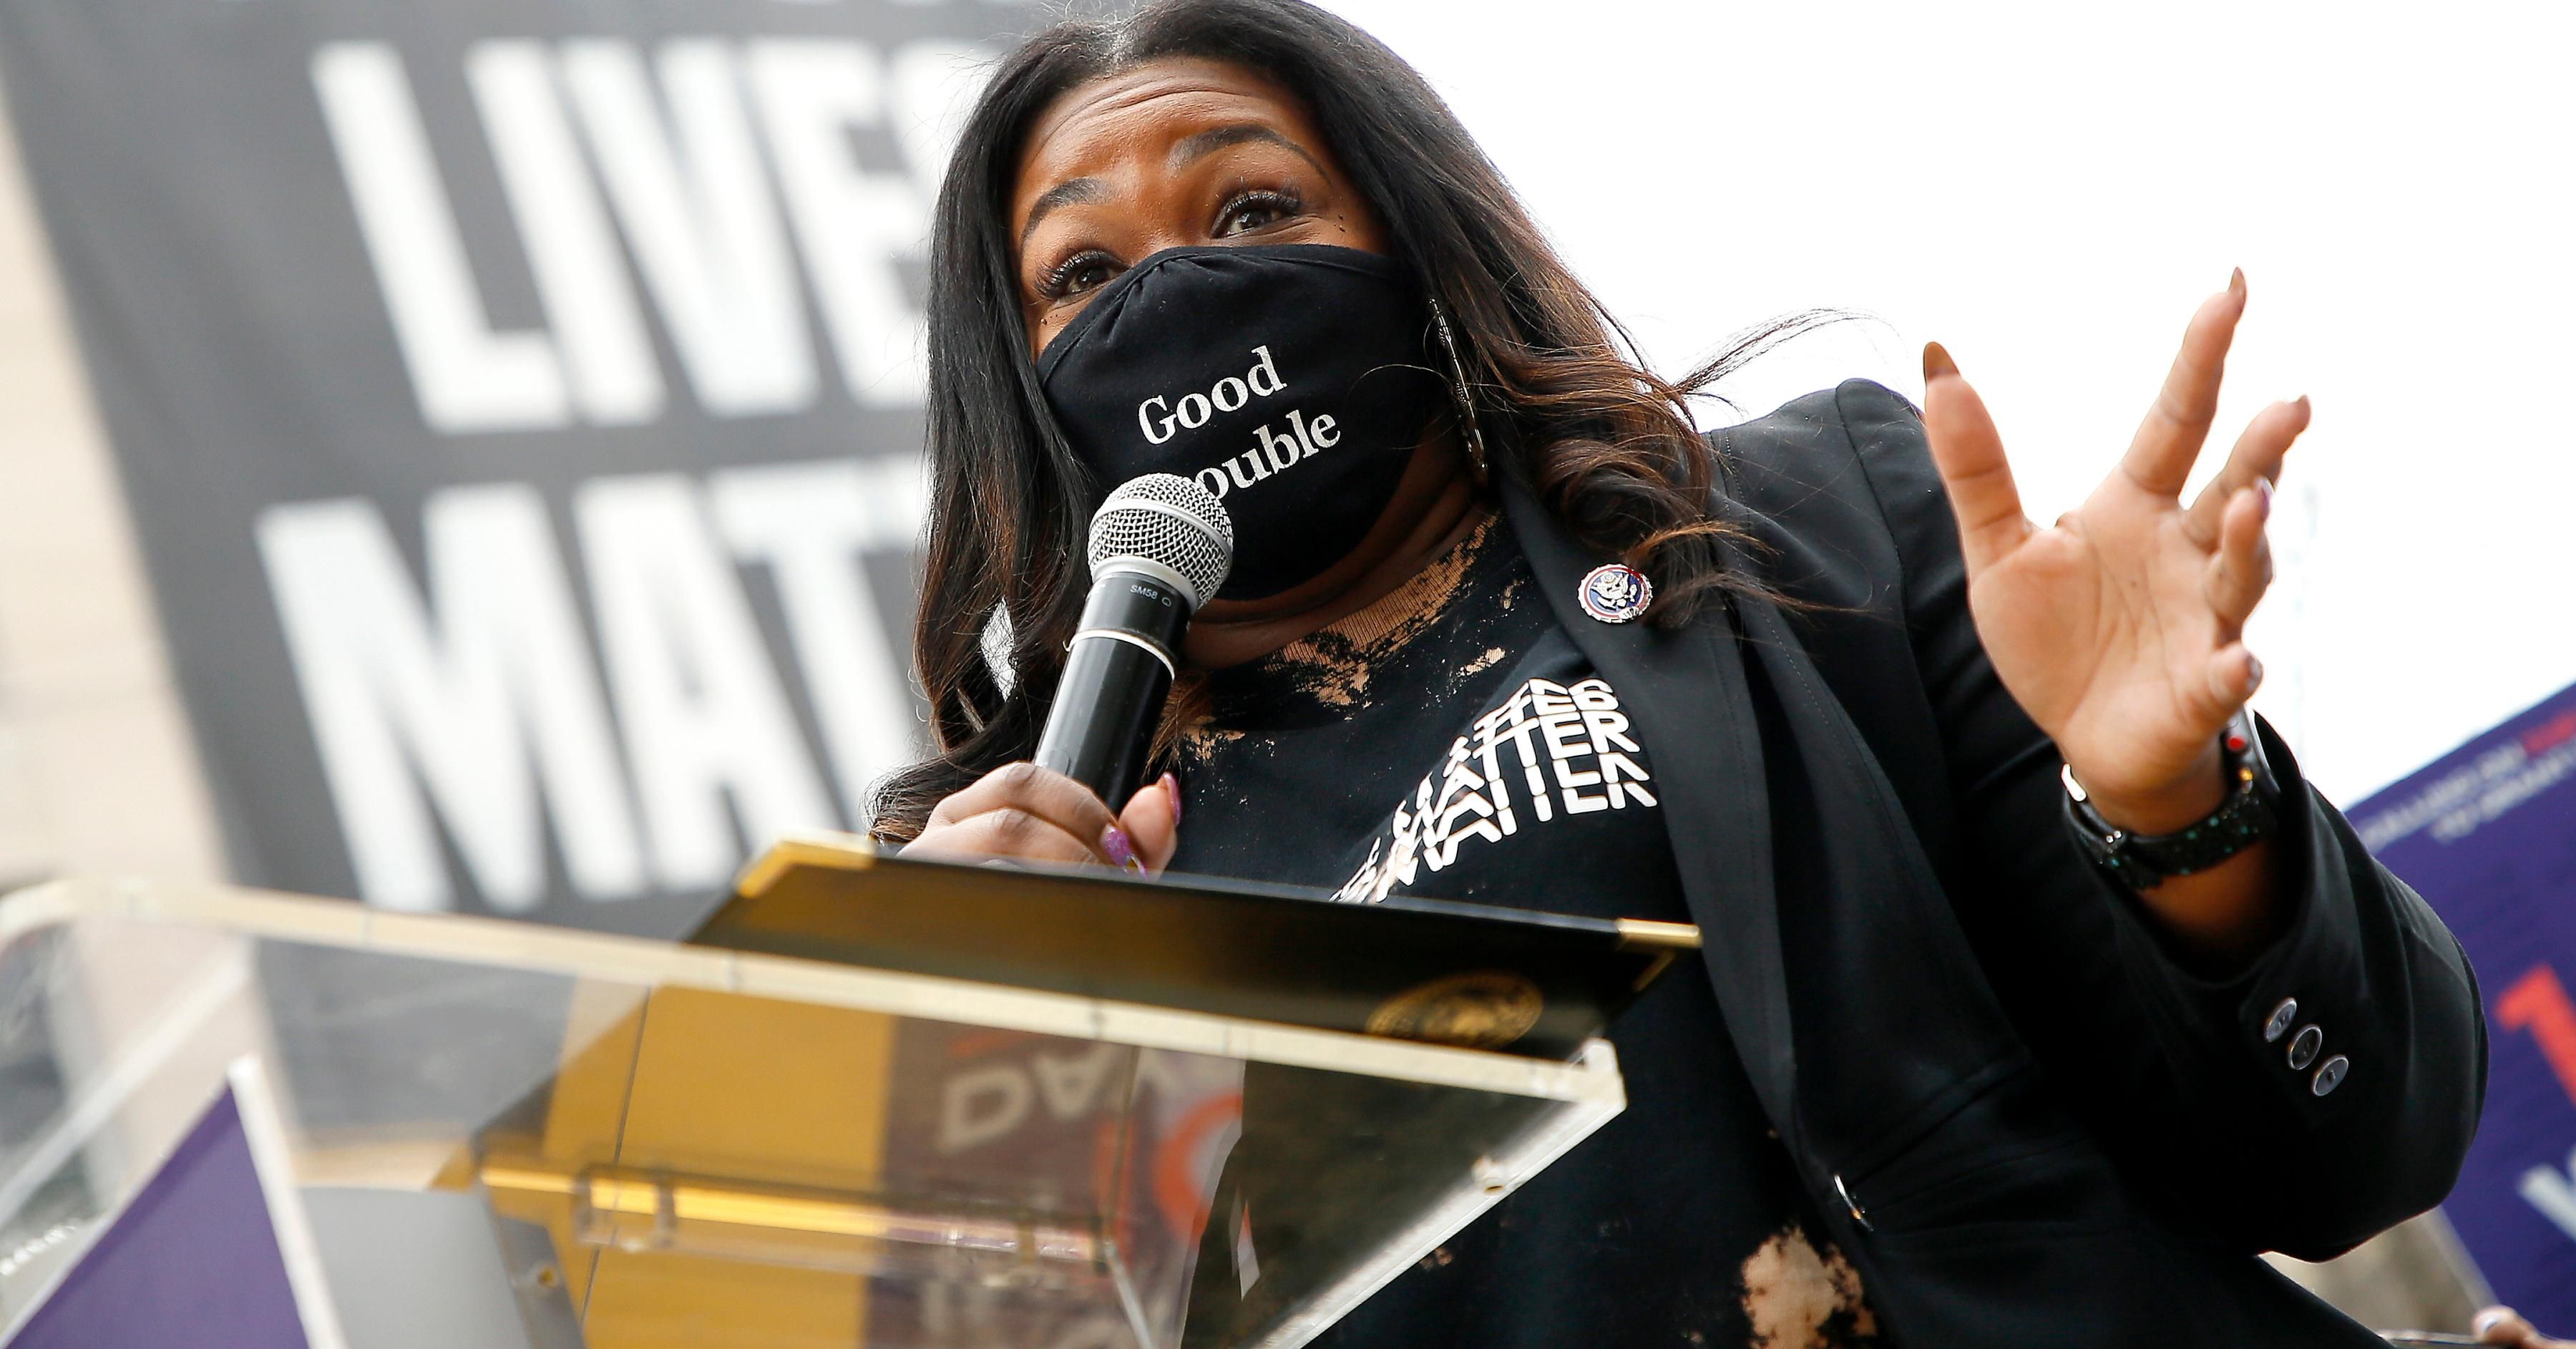 Rep. Cori Bush (D-MO) speaks at The National Council for Incarcerated Women and Girls "100 Women for 100 Women" rally in Black Lives Matter Plaza near The White House on March 12, 2021 in Washington, DC. The organization and its supporters are urging President Joe Biden to release 100 women currently incarcerated in federal prison. 